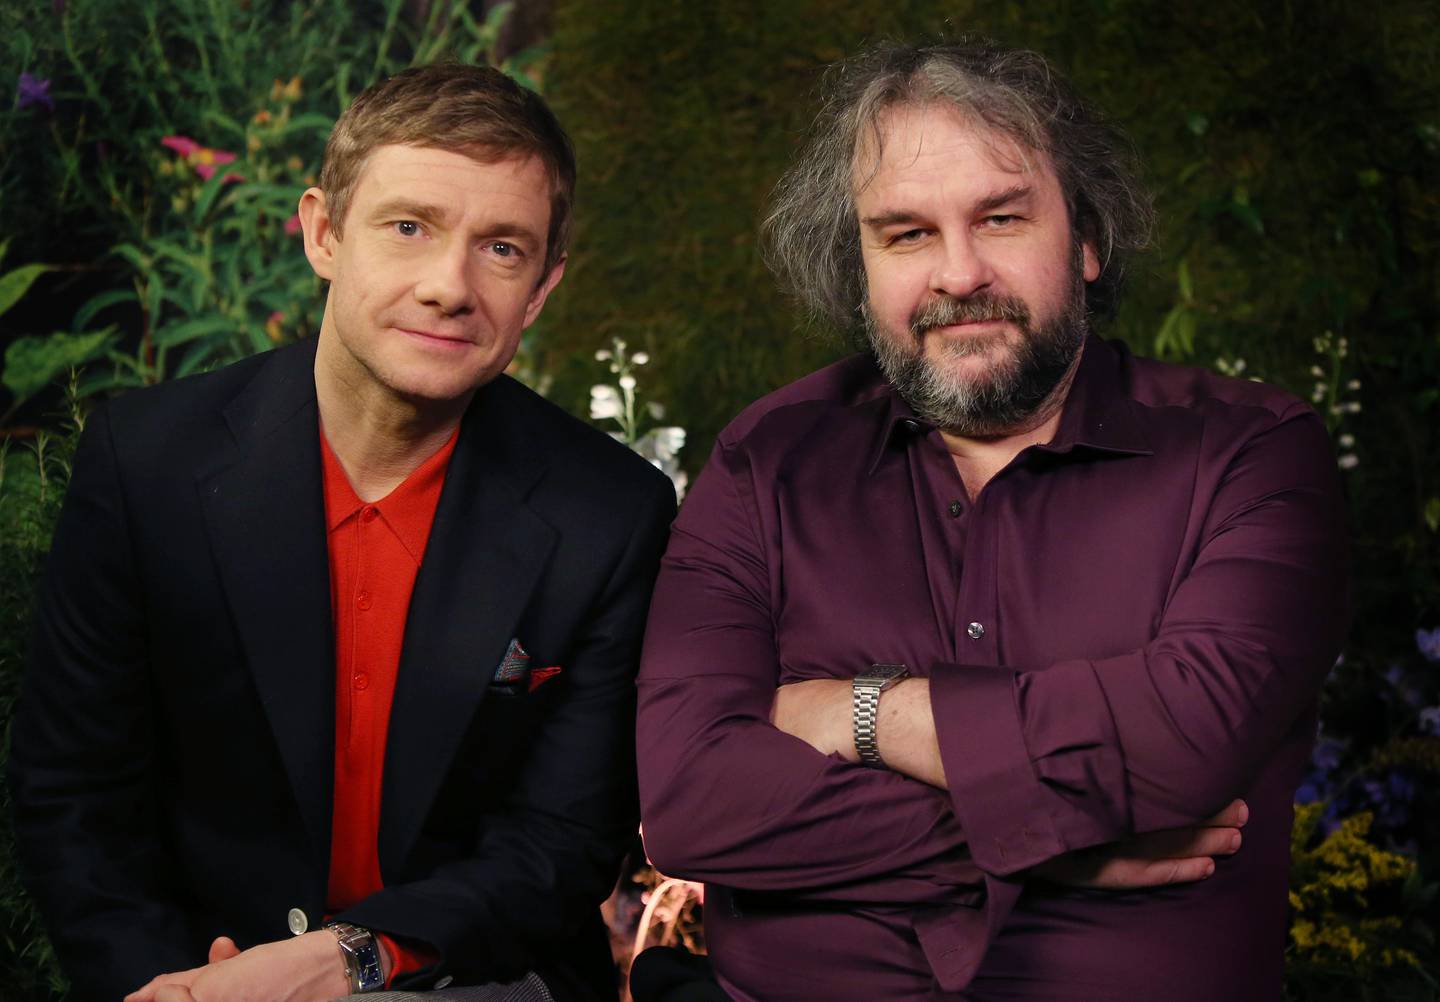 In this picture taken on Monday, Dec. 1, 2014 British actor Martin Freeman and director Peter Jackson from New Zealand poses for photographs in promotion for the film 'The Hobbit, Battle of the Five Armies' in the Claridges suite in west London. After a long and eventful journey, "The Hobbit" trilogy has reached its bloody climax. Not a minute too soon for director Peter Jackson, who has been longing to unleash mayhem on Middle Earth. "It's the first time we've got to kill dwarves," said the director, his enthusiasm for death and destruction at odds with his laid-back manner and luxurious surroundings in a London hotel suite. "It's hard to get any emotional power in a film unless you are able to actually kill some of your main characters,? he said. ?We've been hampered with that in the first two 'Hobbit' movies. But at least we have a good dwarf death toll in the third one." "The Hobbit: The Battle of the Five Armies" wraps up the trilogy spun from J.R.R. Tolkien's slim book about home-loving hobbit Bilbo Baggins, coaxed away from his burrow to help a band of dwarves retake their mountain home from a destructive dragon. (Photo by Joel Ryan/Invision/AP) 